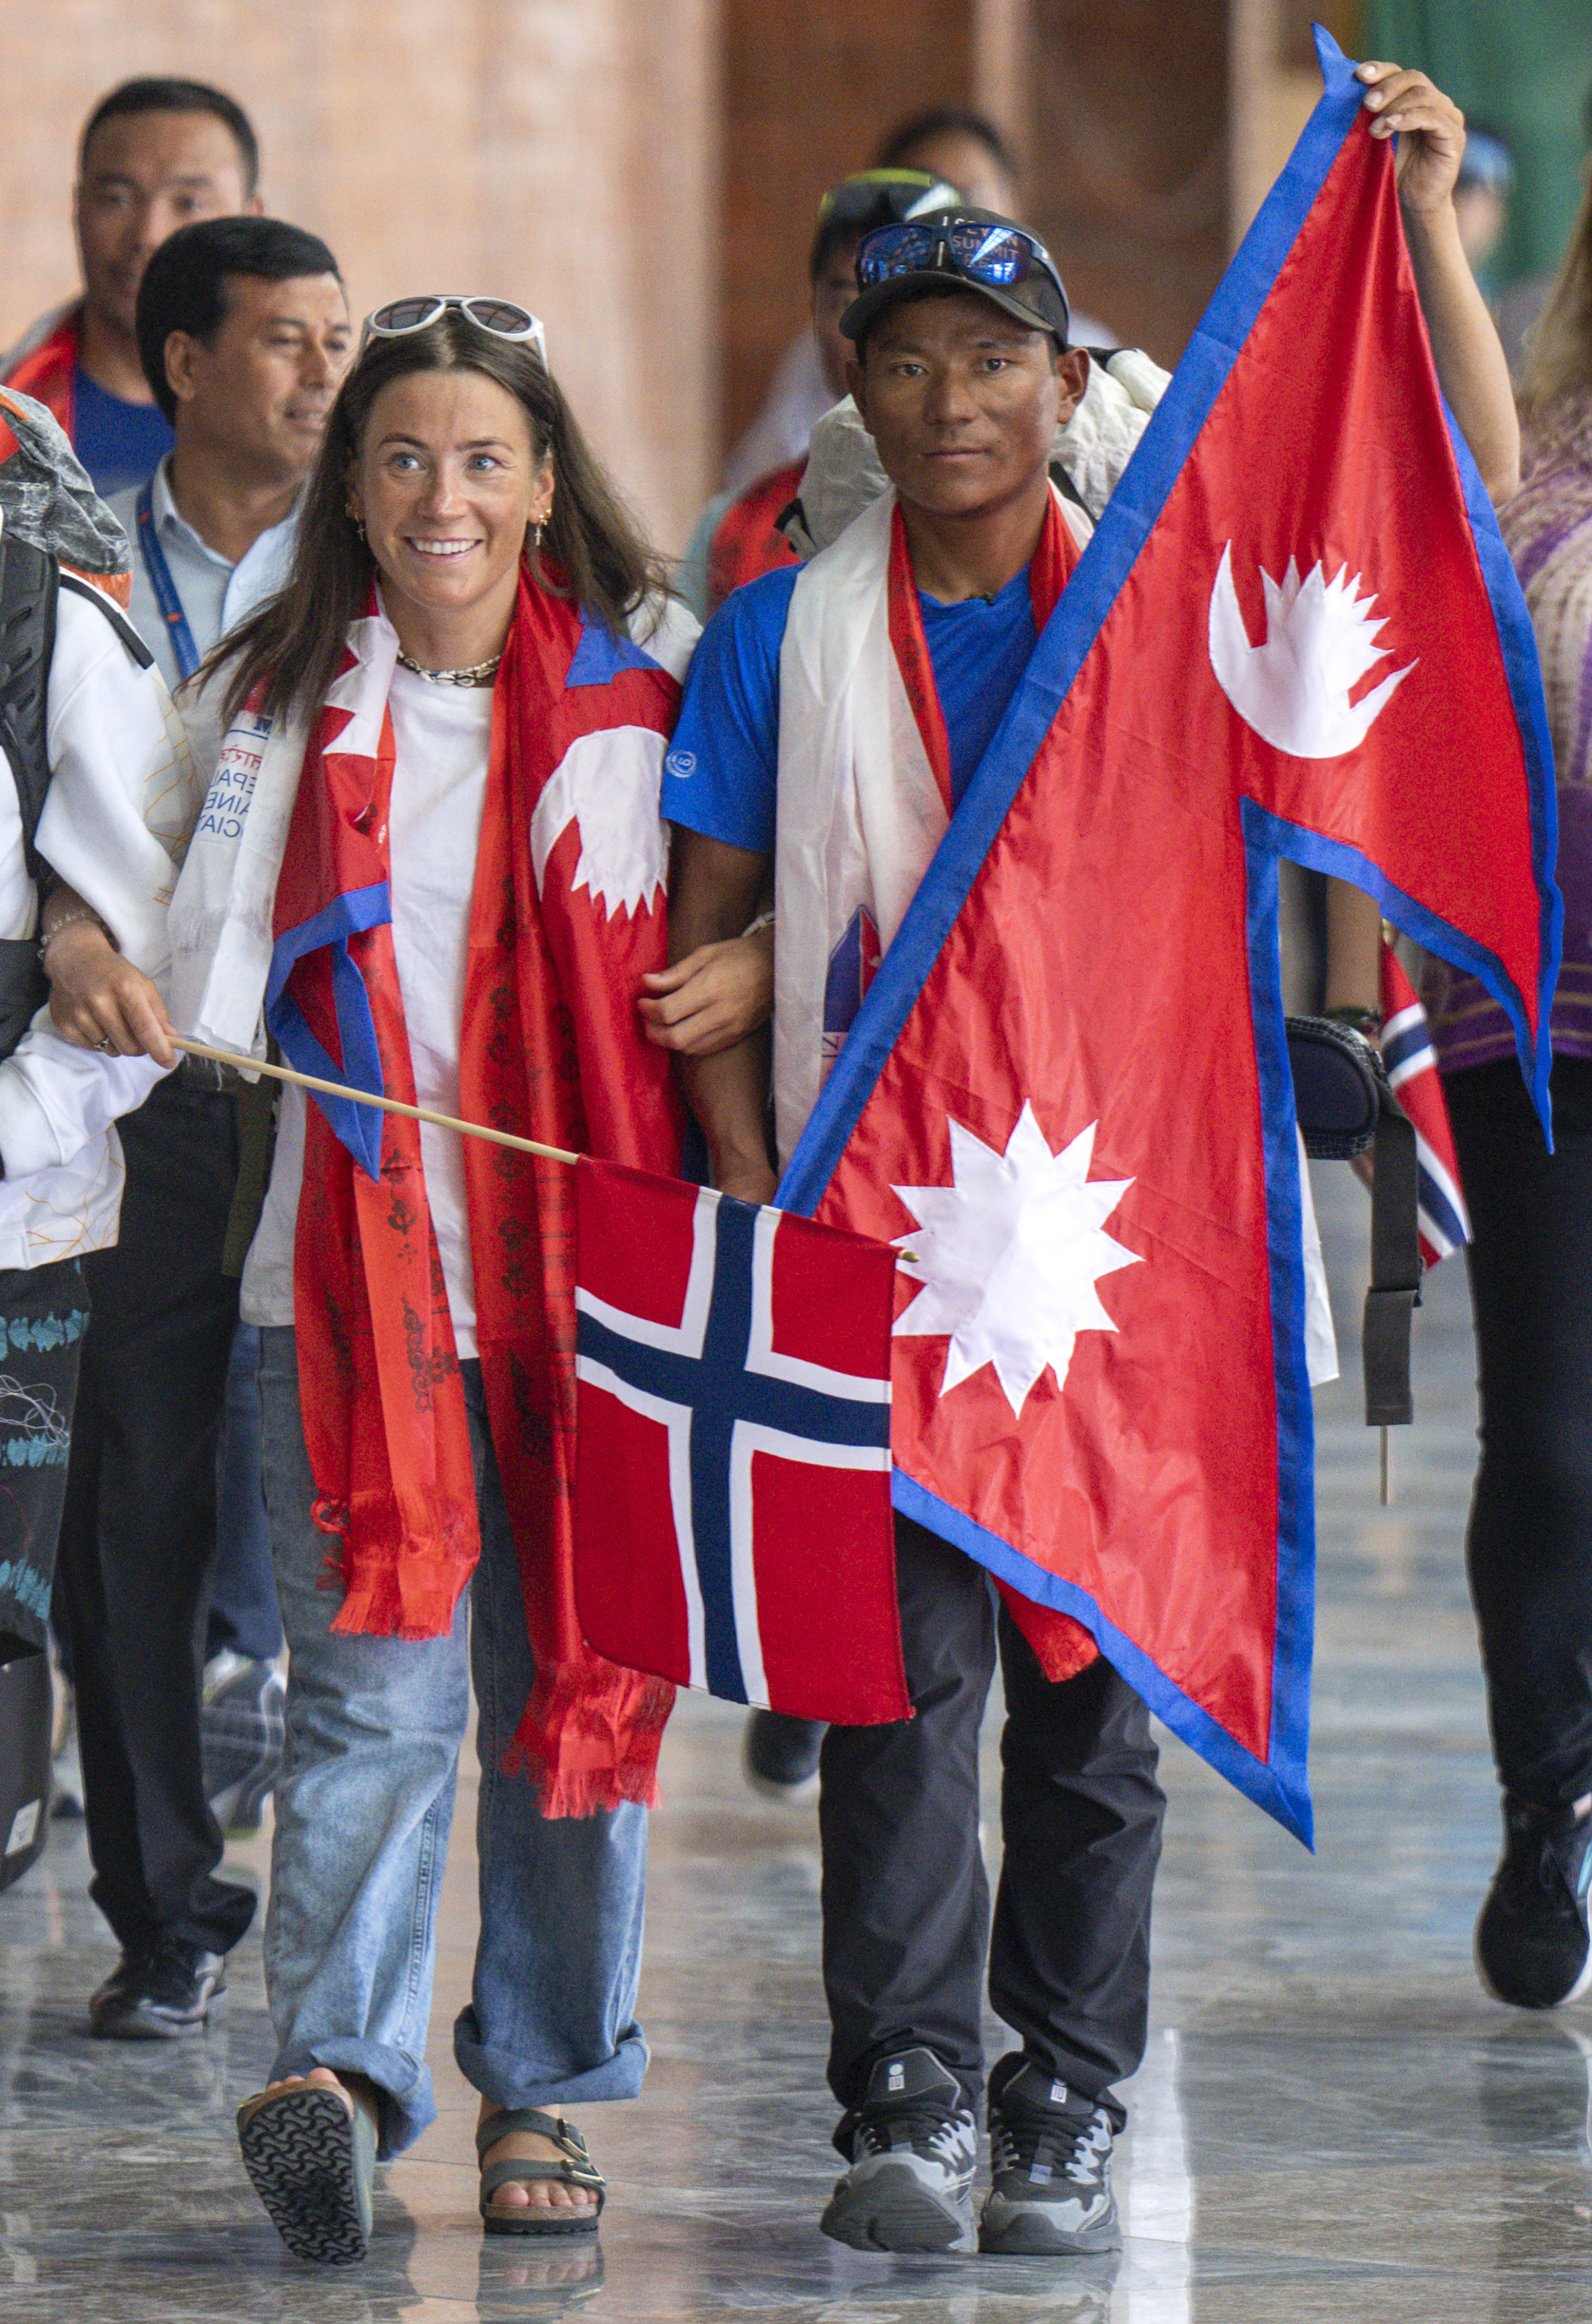 Norwegian climber Kristin Harila (left) and her Nepali guide Tenjen Sherpa, climbed the world’s 14 tallest mountains in record time. Photo: AP